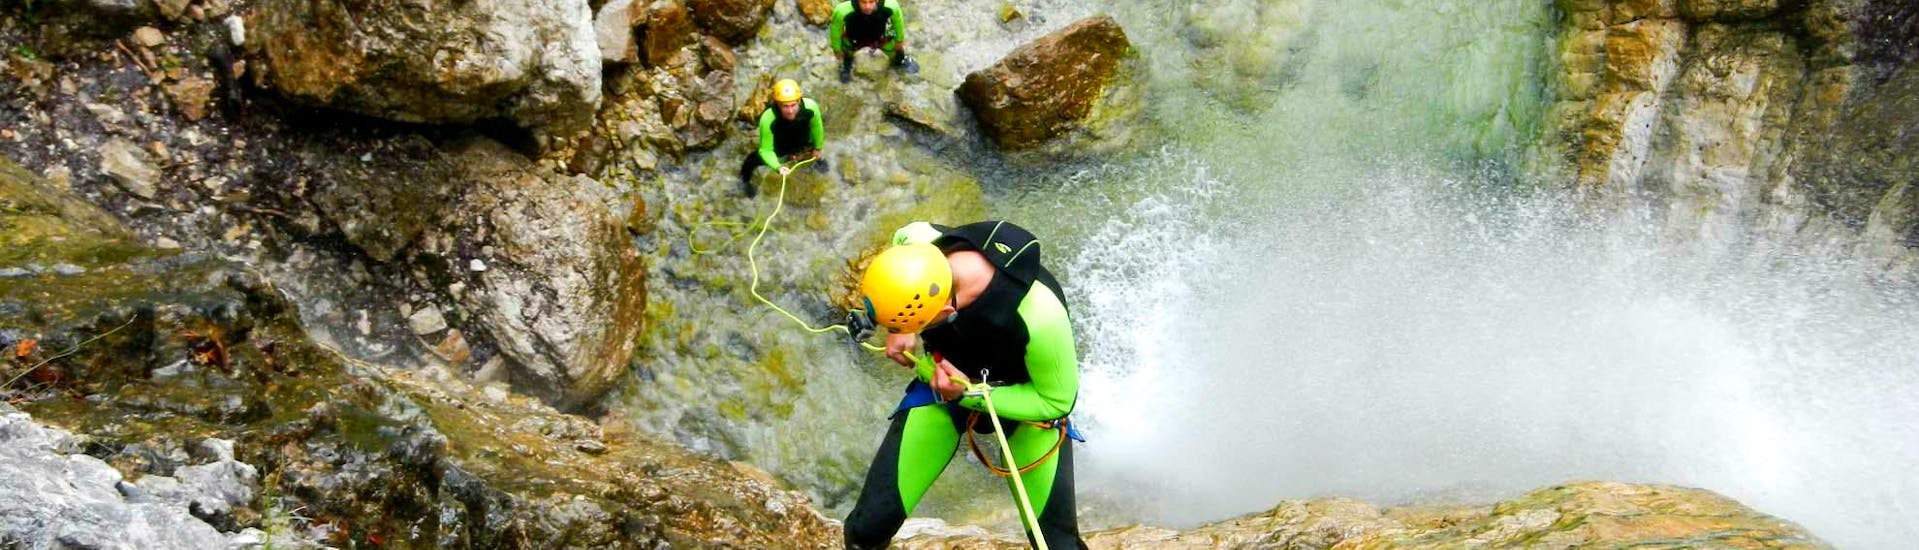 Expert Canyoning in Bovec - Predelica.